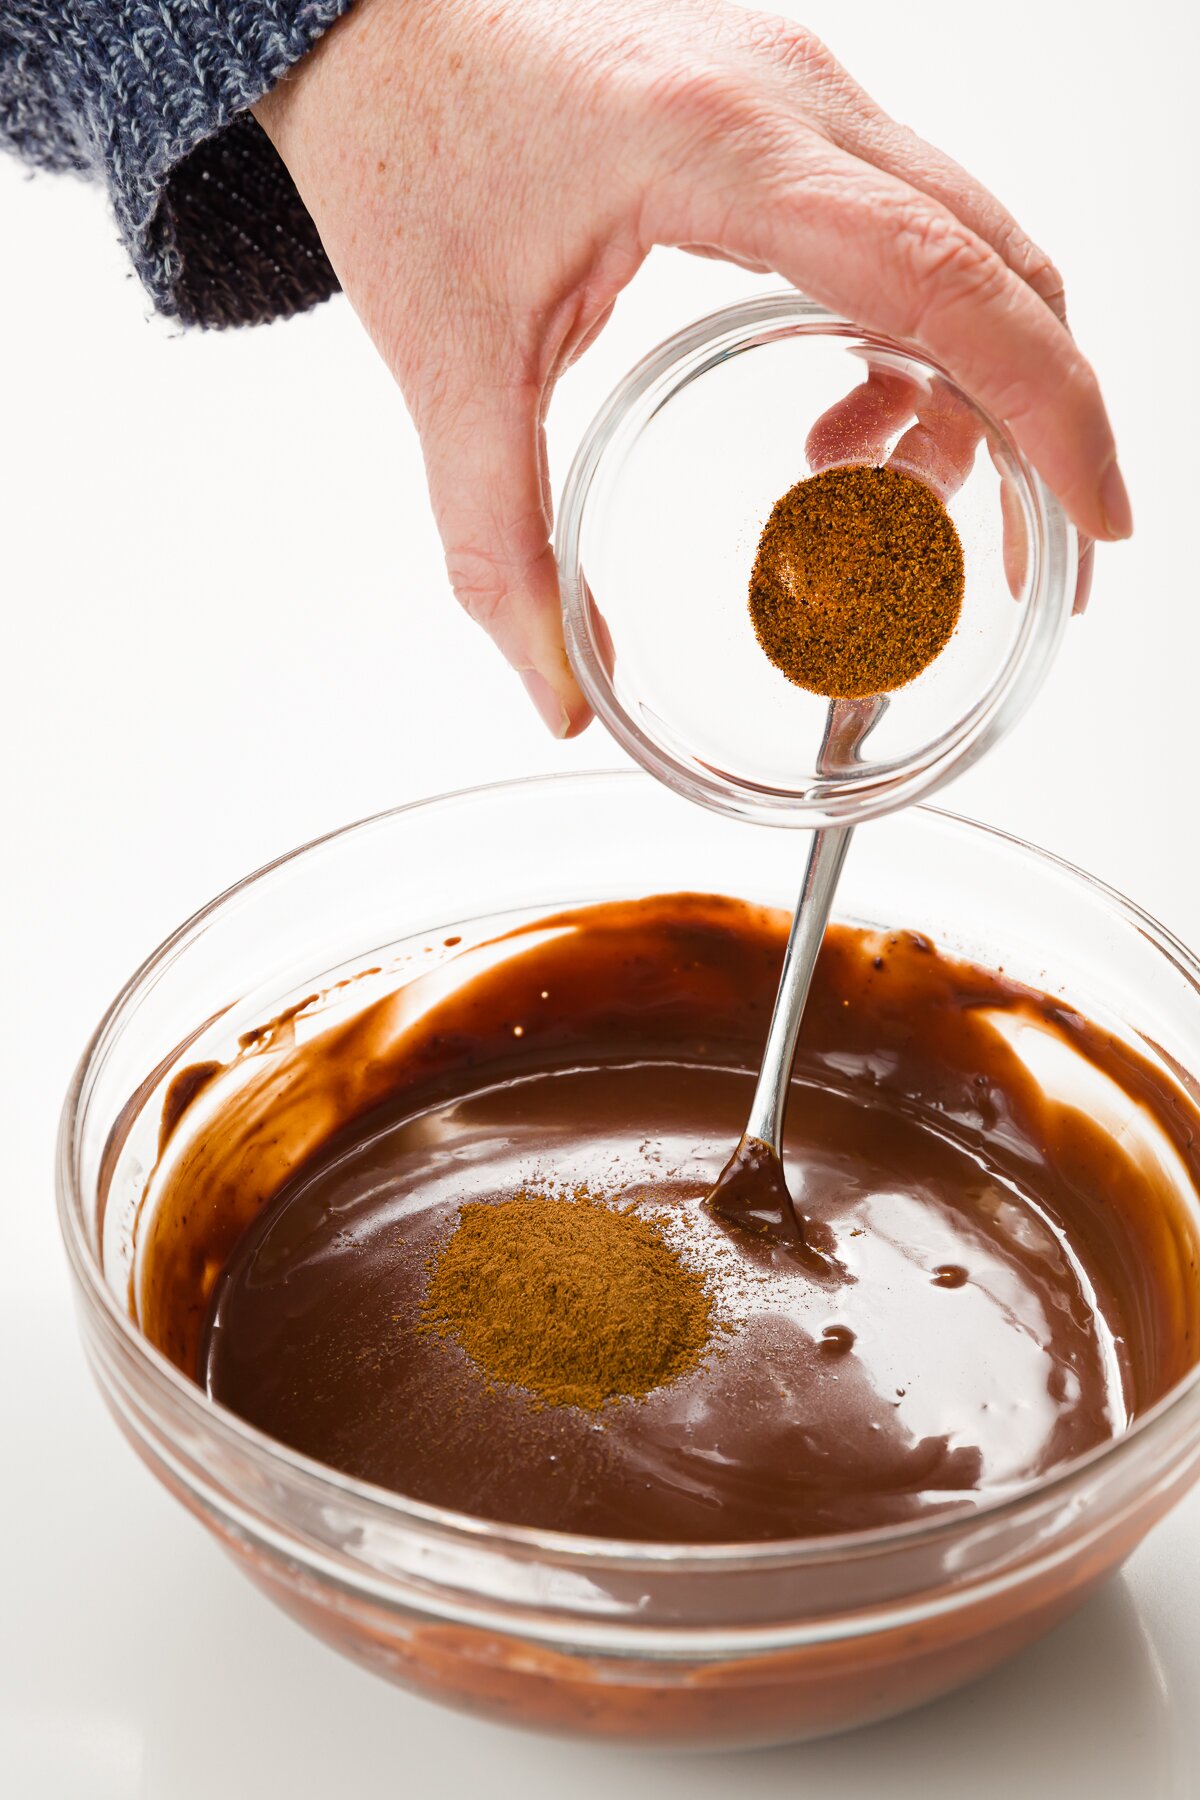 Adding cayane pepper to chocolate sauce